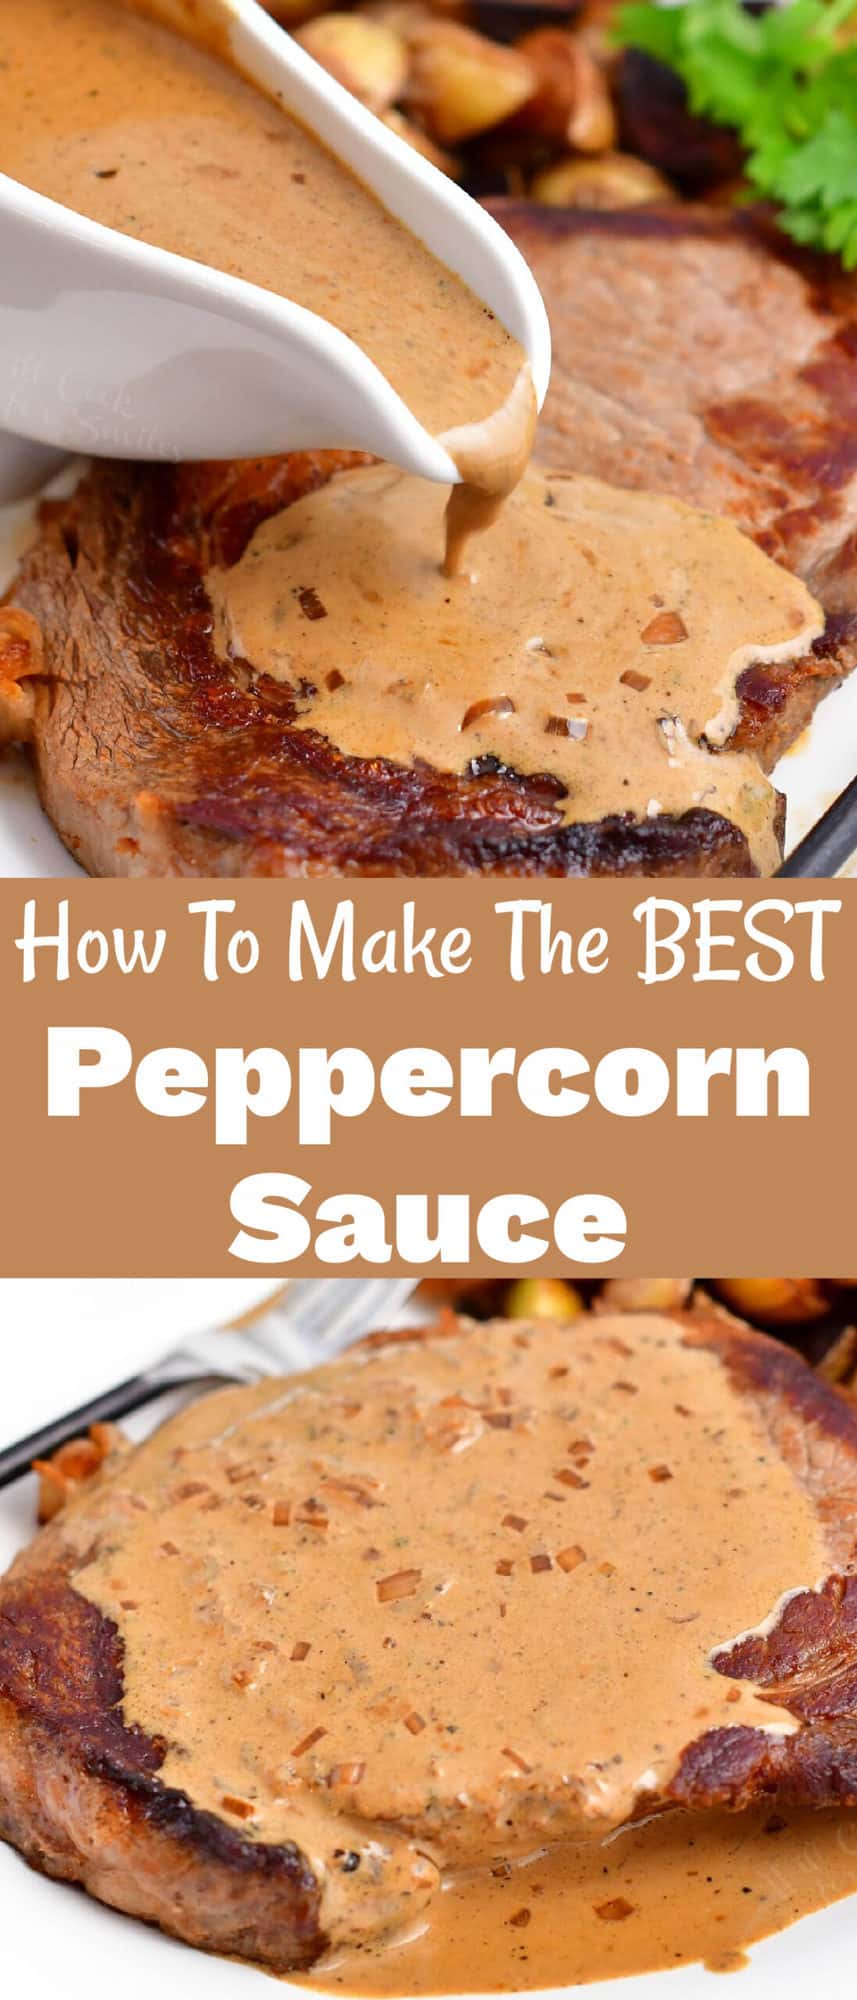 titled photo collage (and shown): How To Make The BEST Peppercorn Sauce